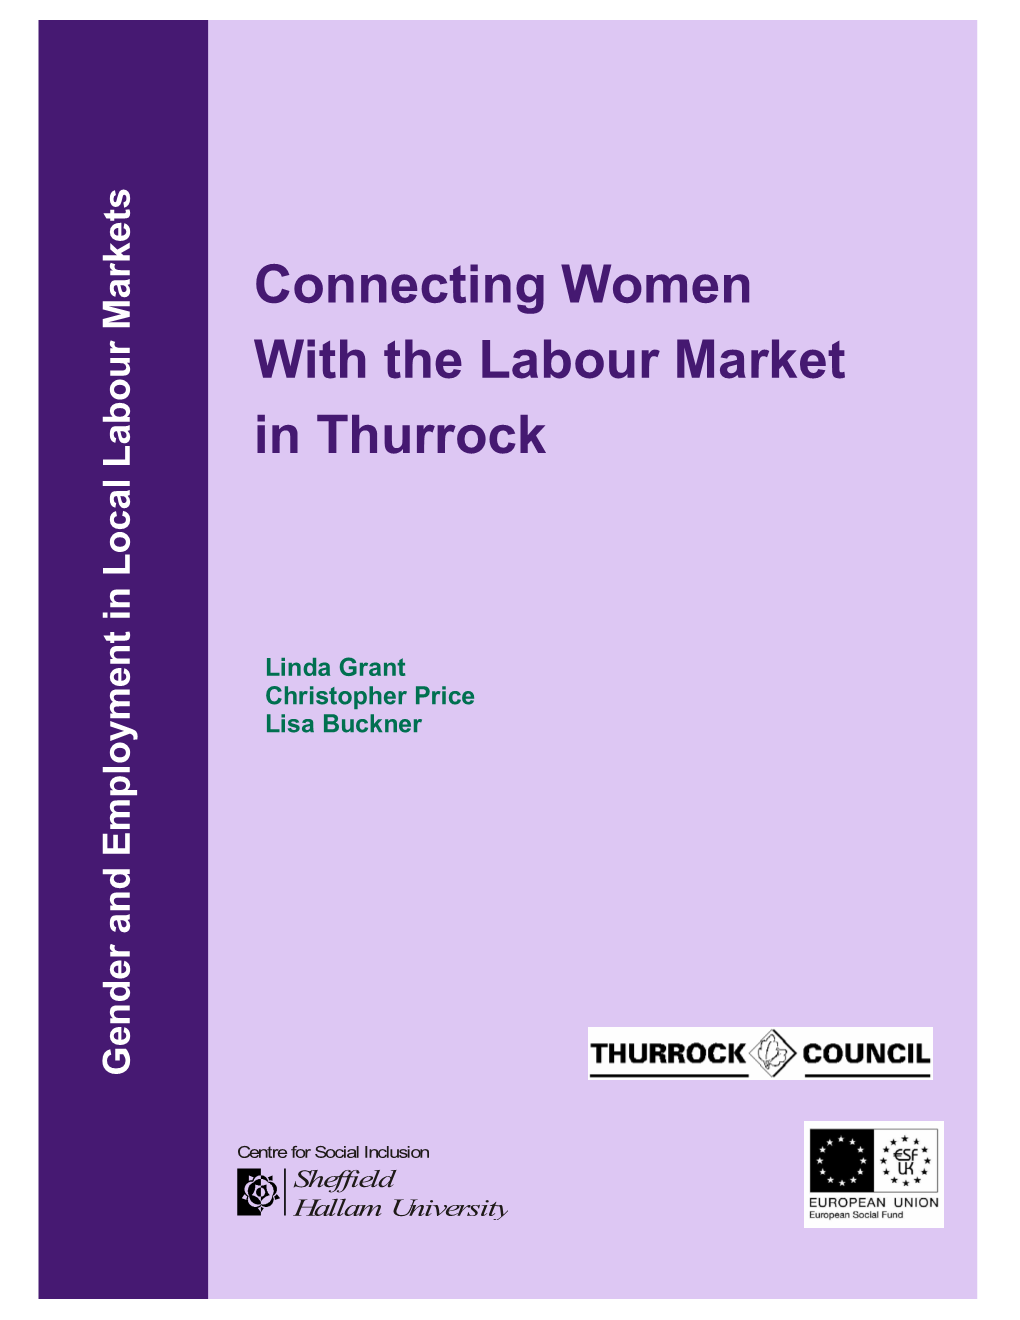 Connecting Women with the Labour Market in Thurrock